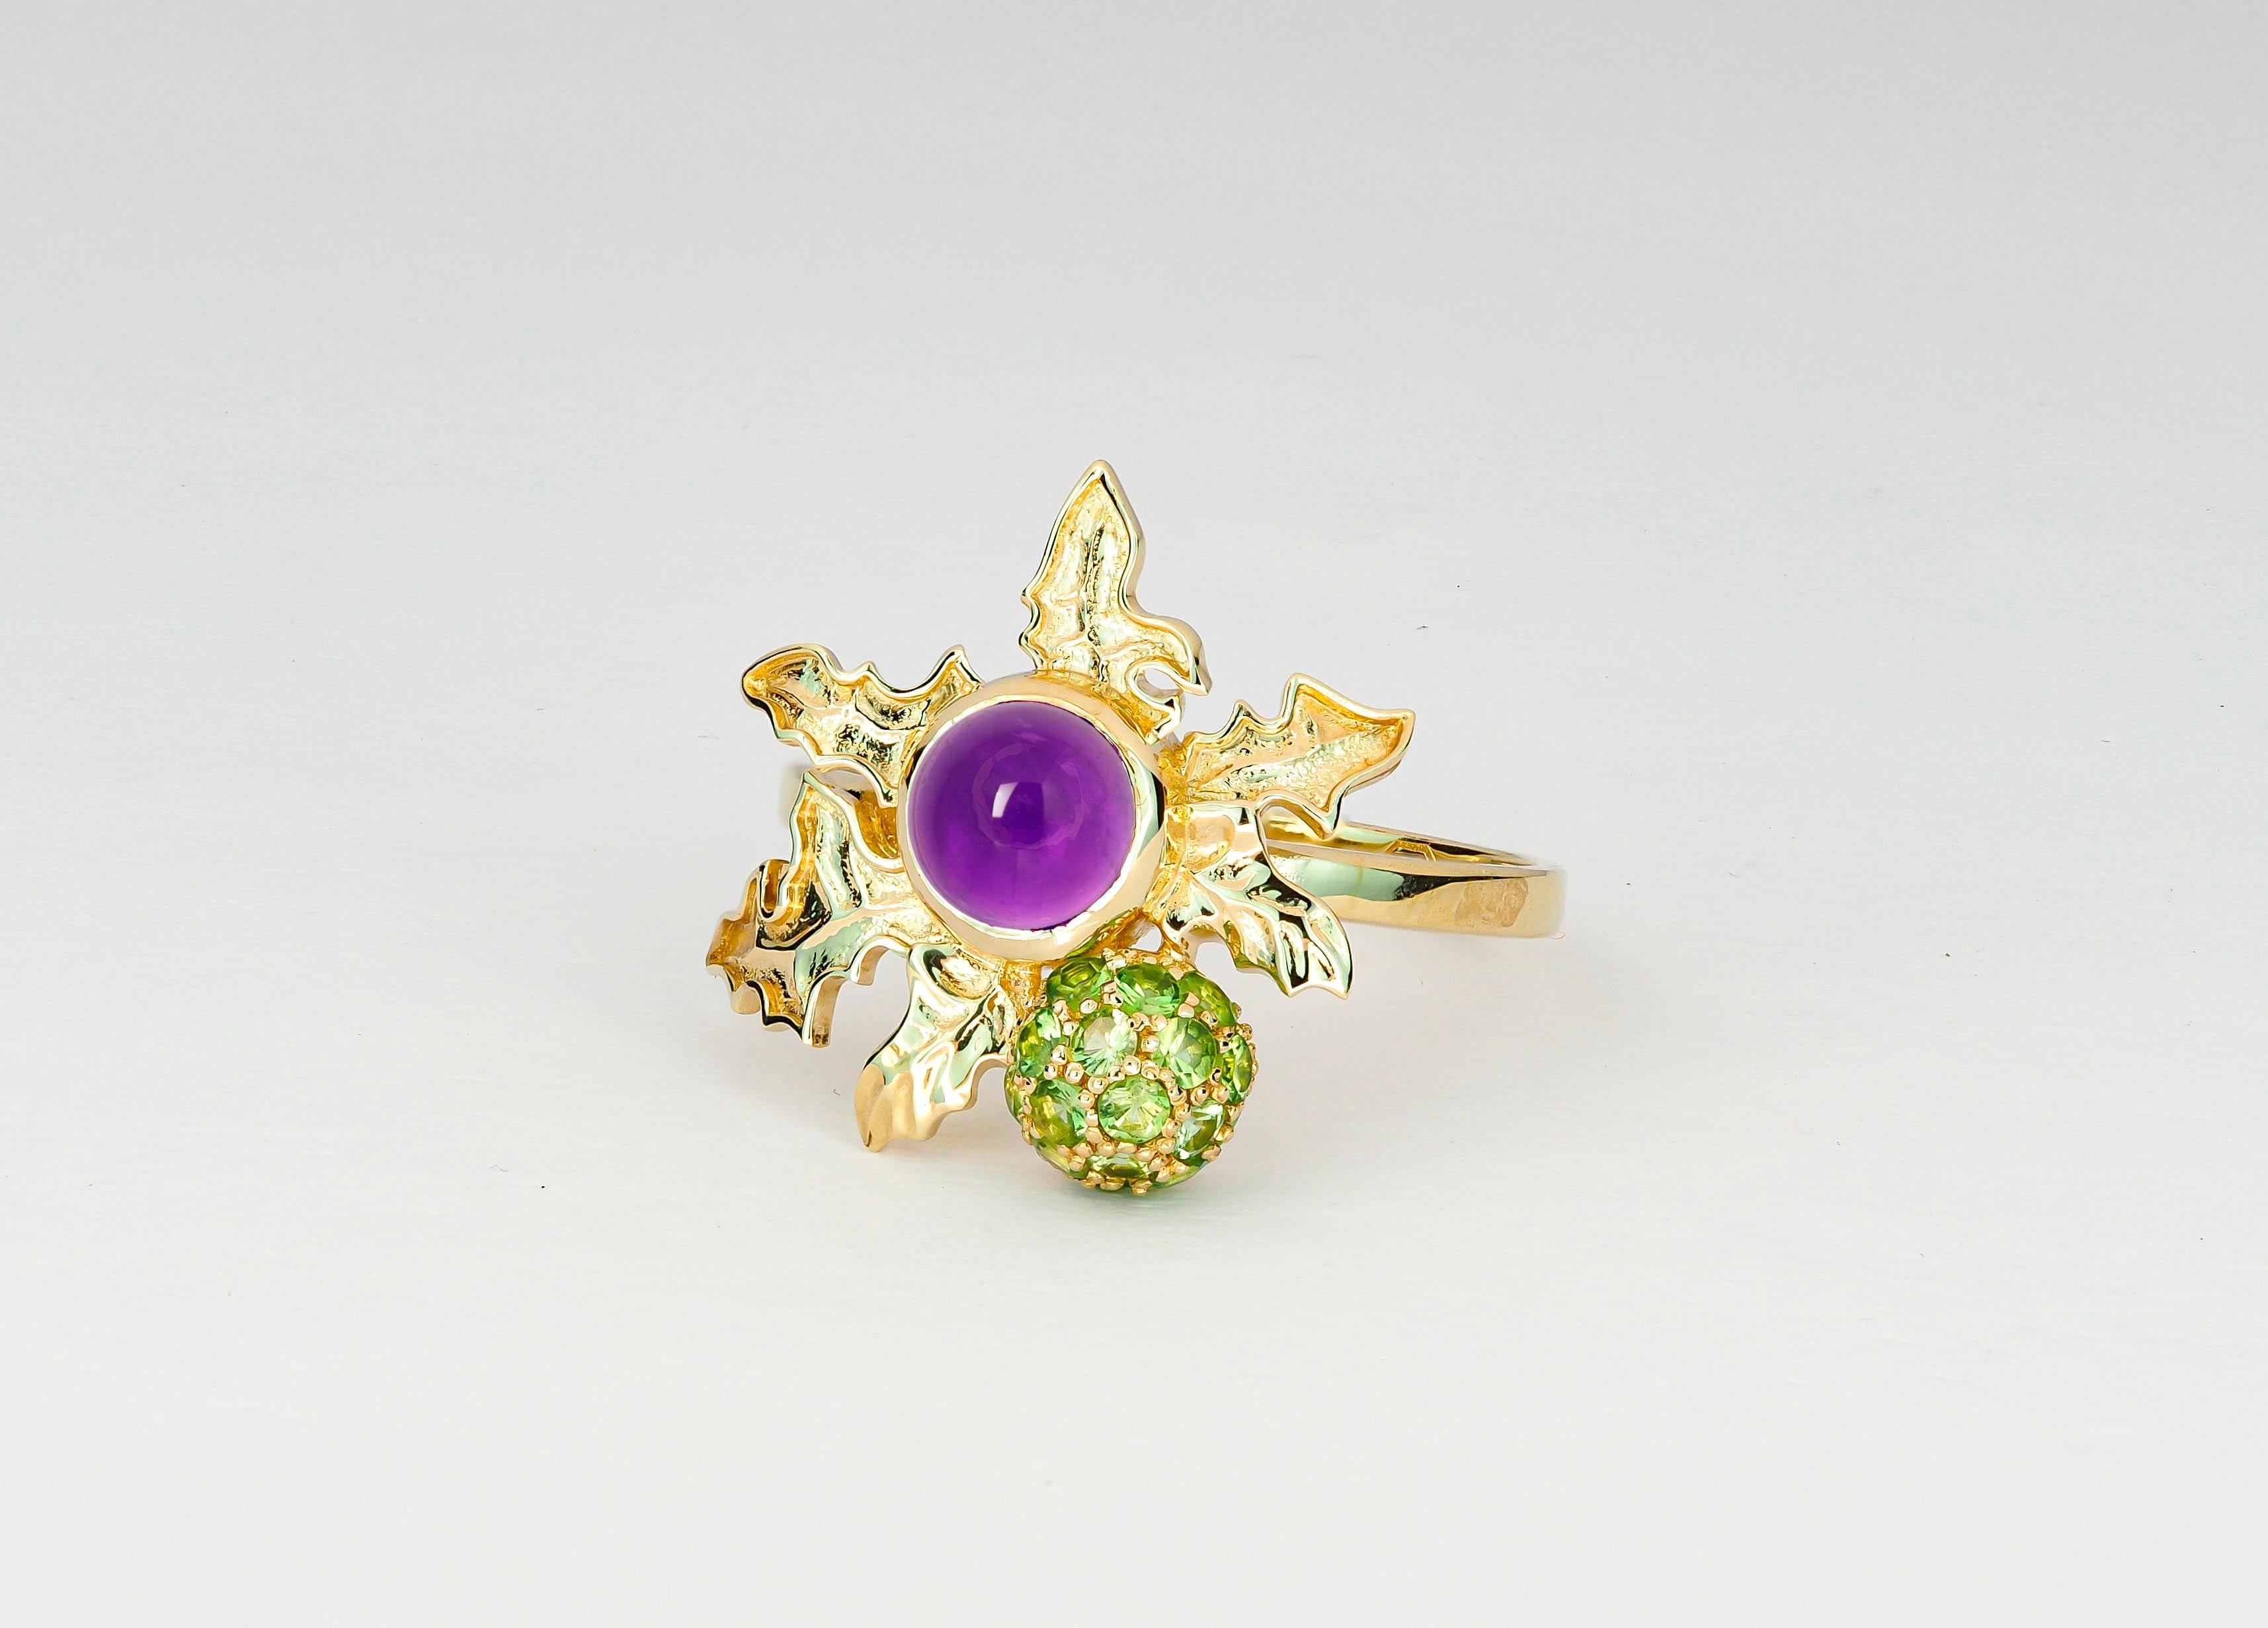 For Sale:  14 K Gold Scottish Thistle Ring with Amethyst and Peridots! 7